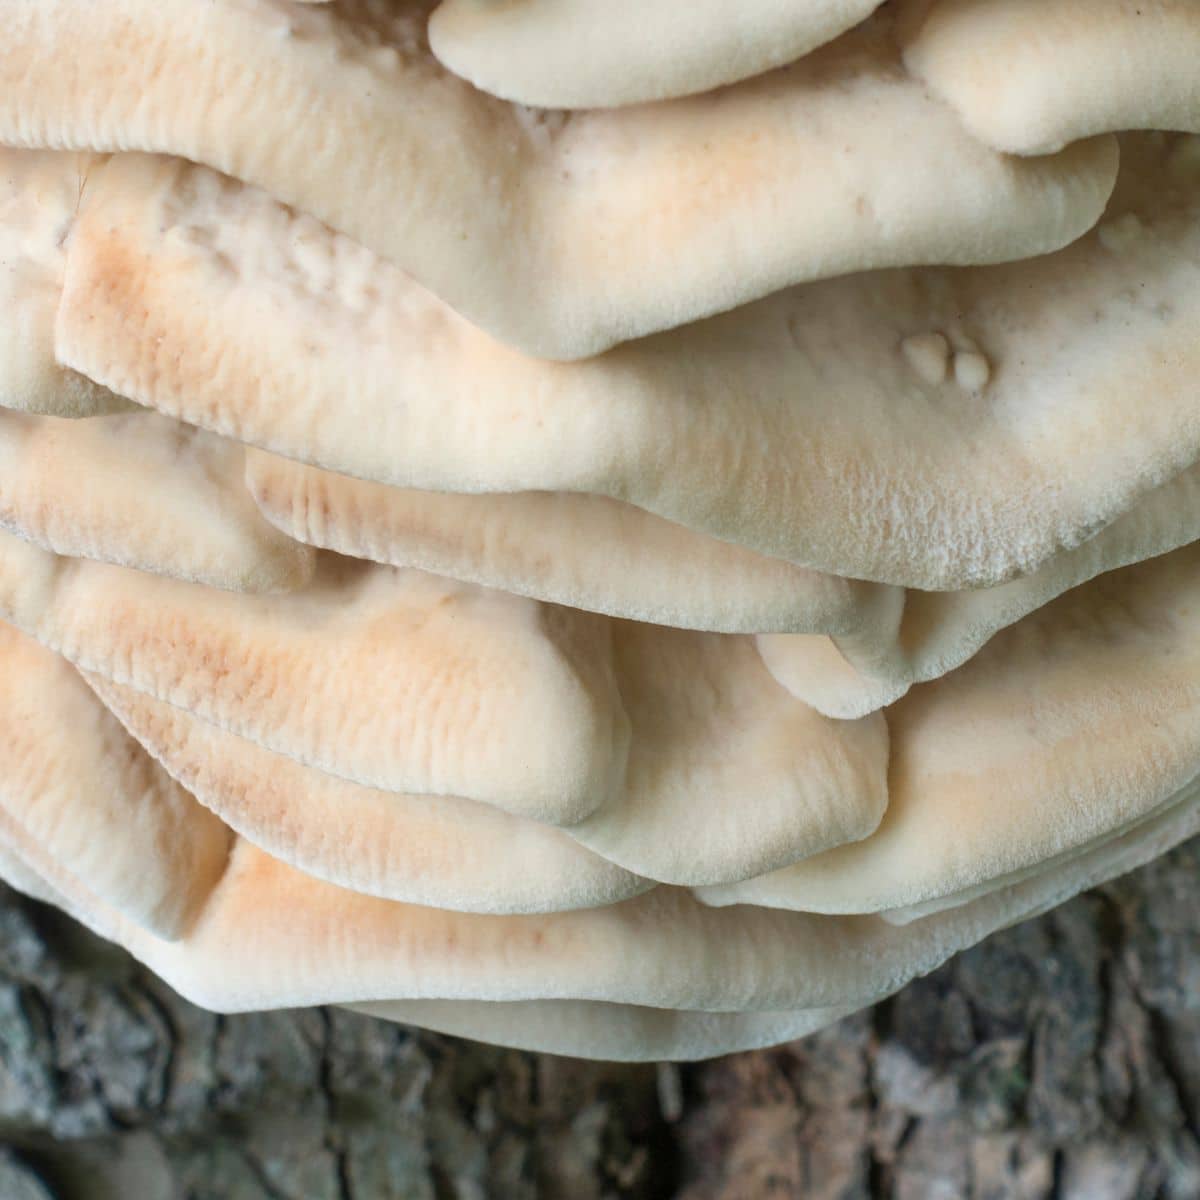 close up of northern tooth fungus caps, white rot fungus